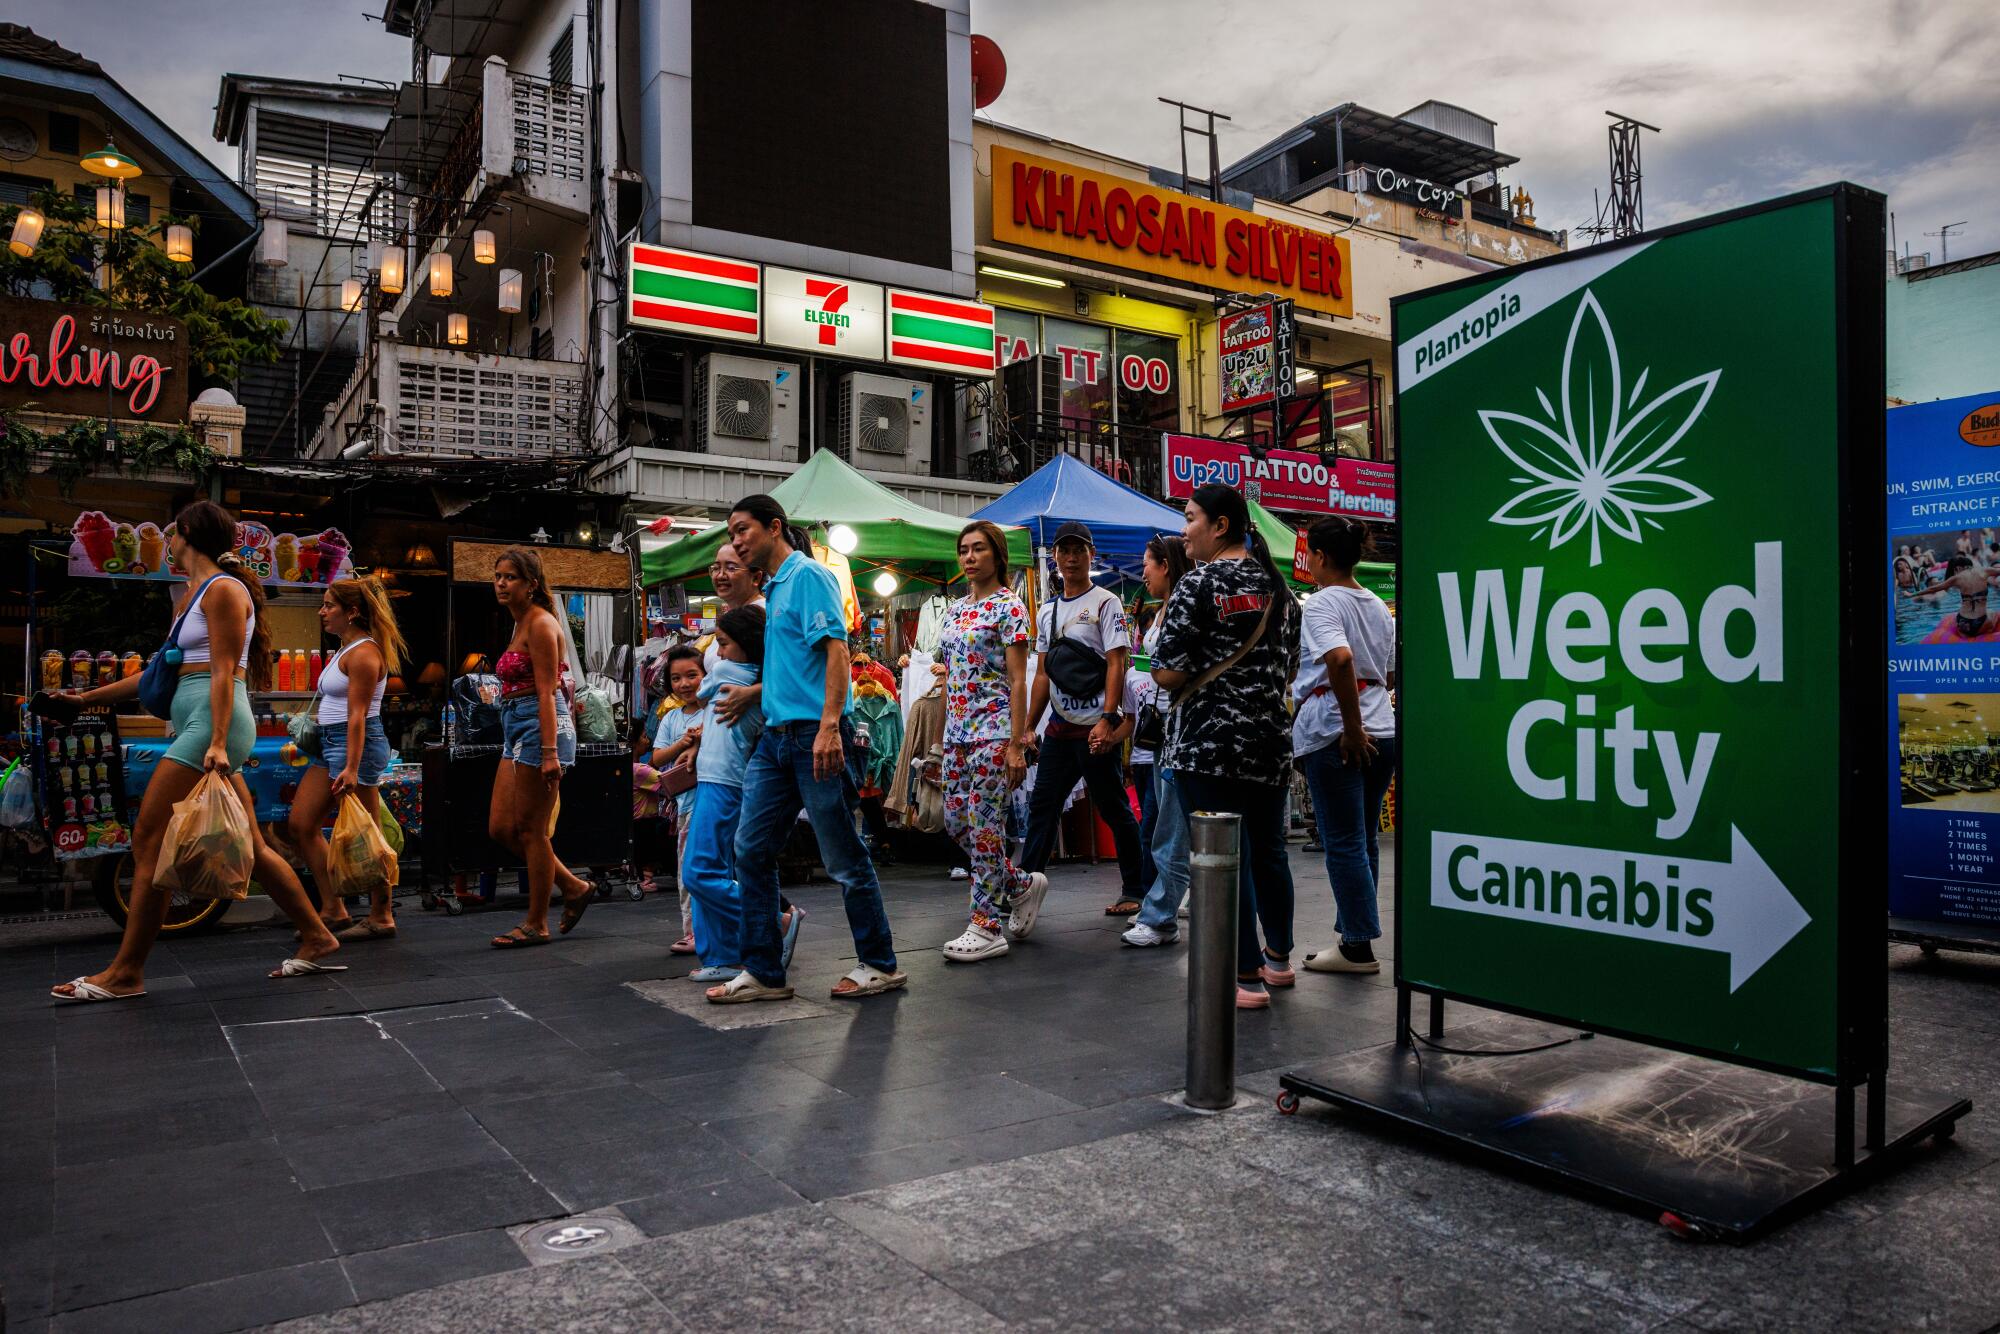 People walk past storefronts and a green sign that says Weed City